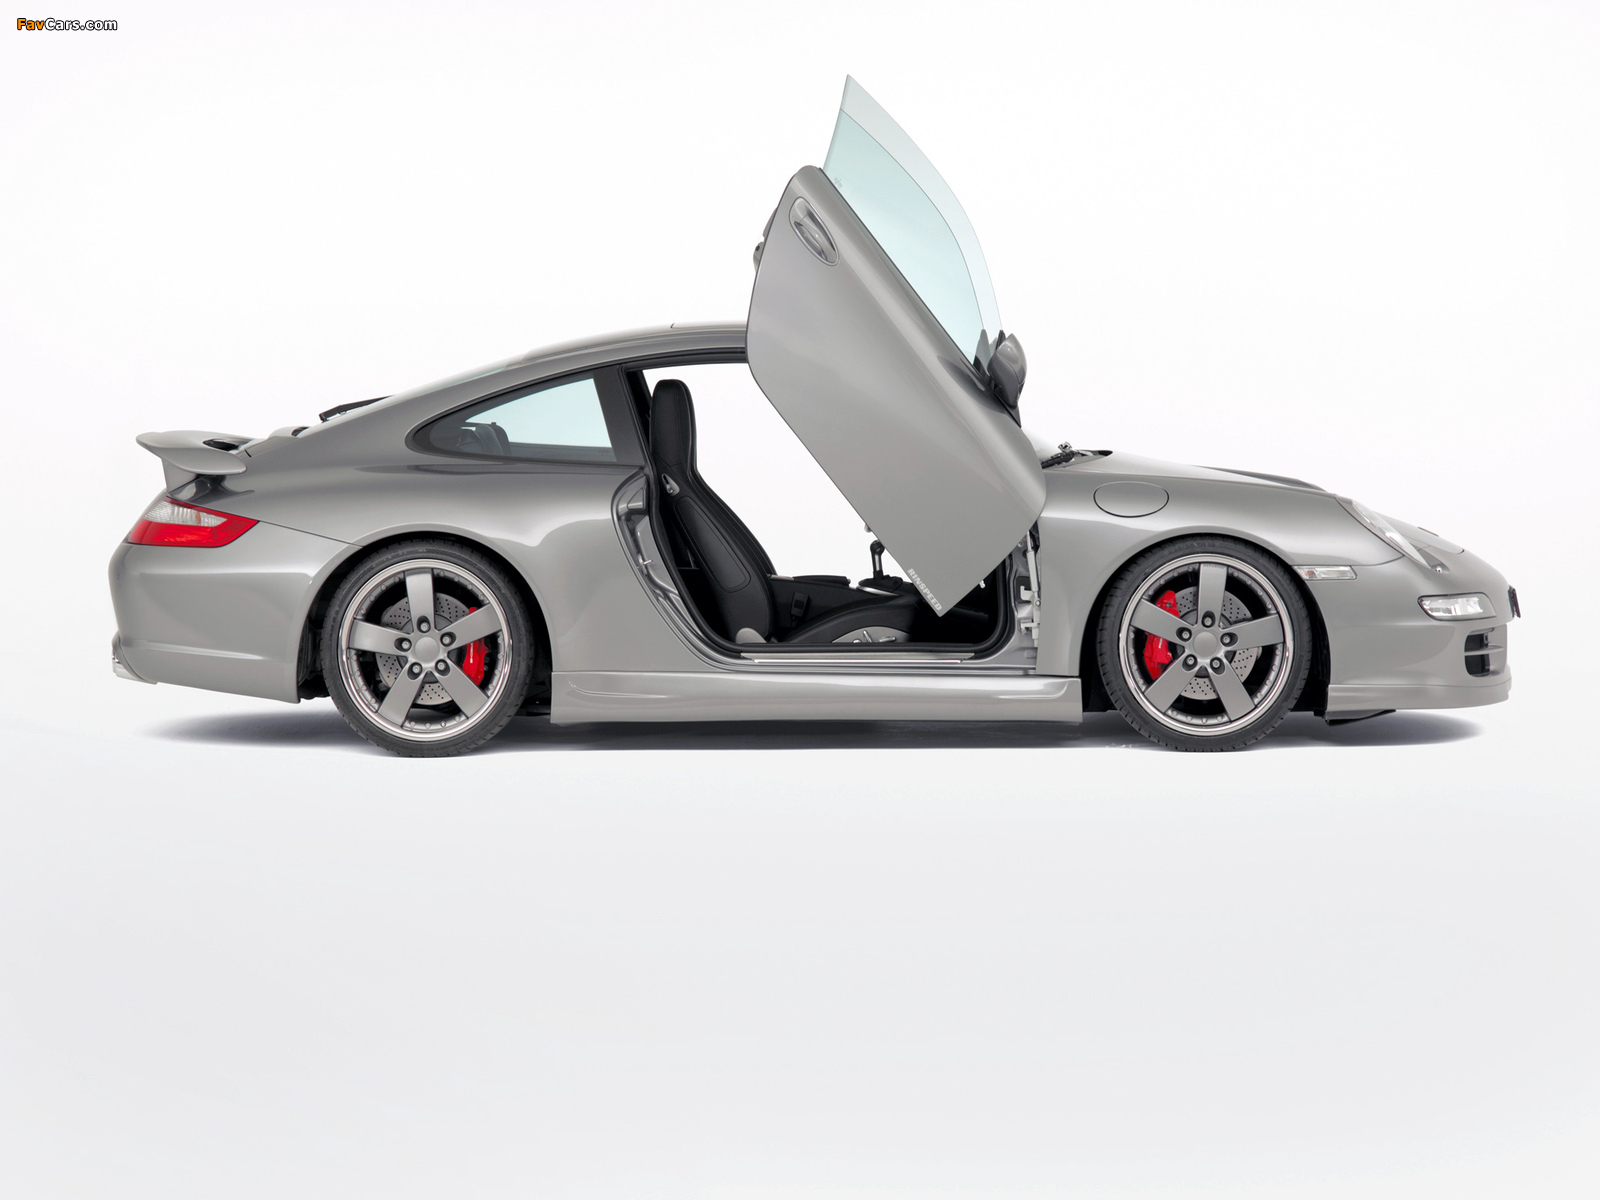 Rinspeed Porsche 911 Carrera Coupe (997) pictures (1600 x 1200)